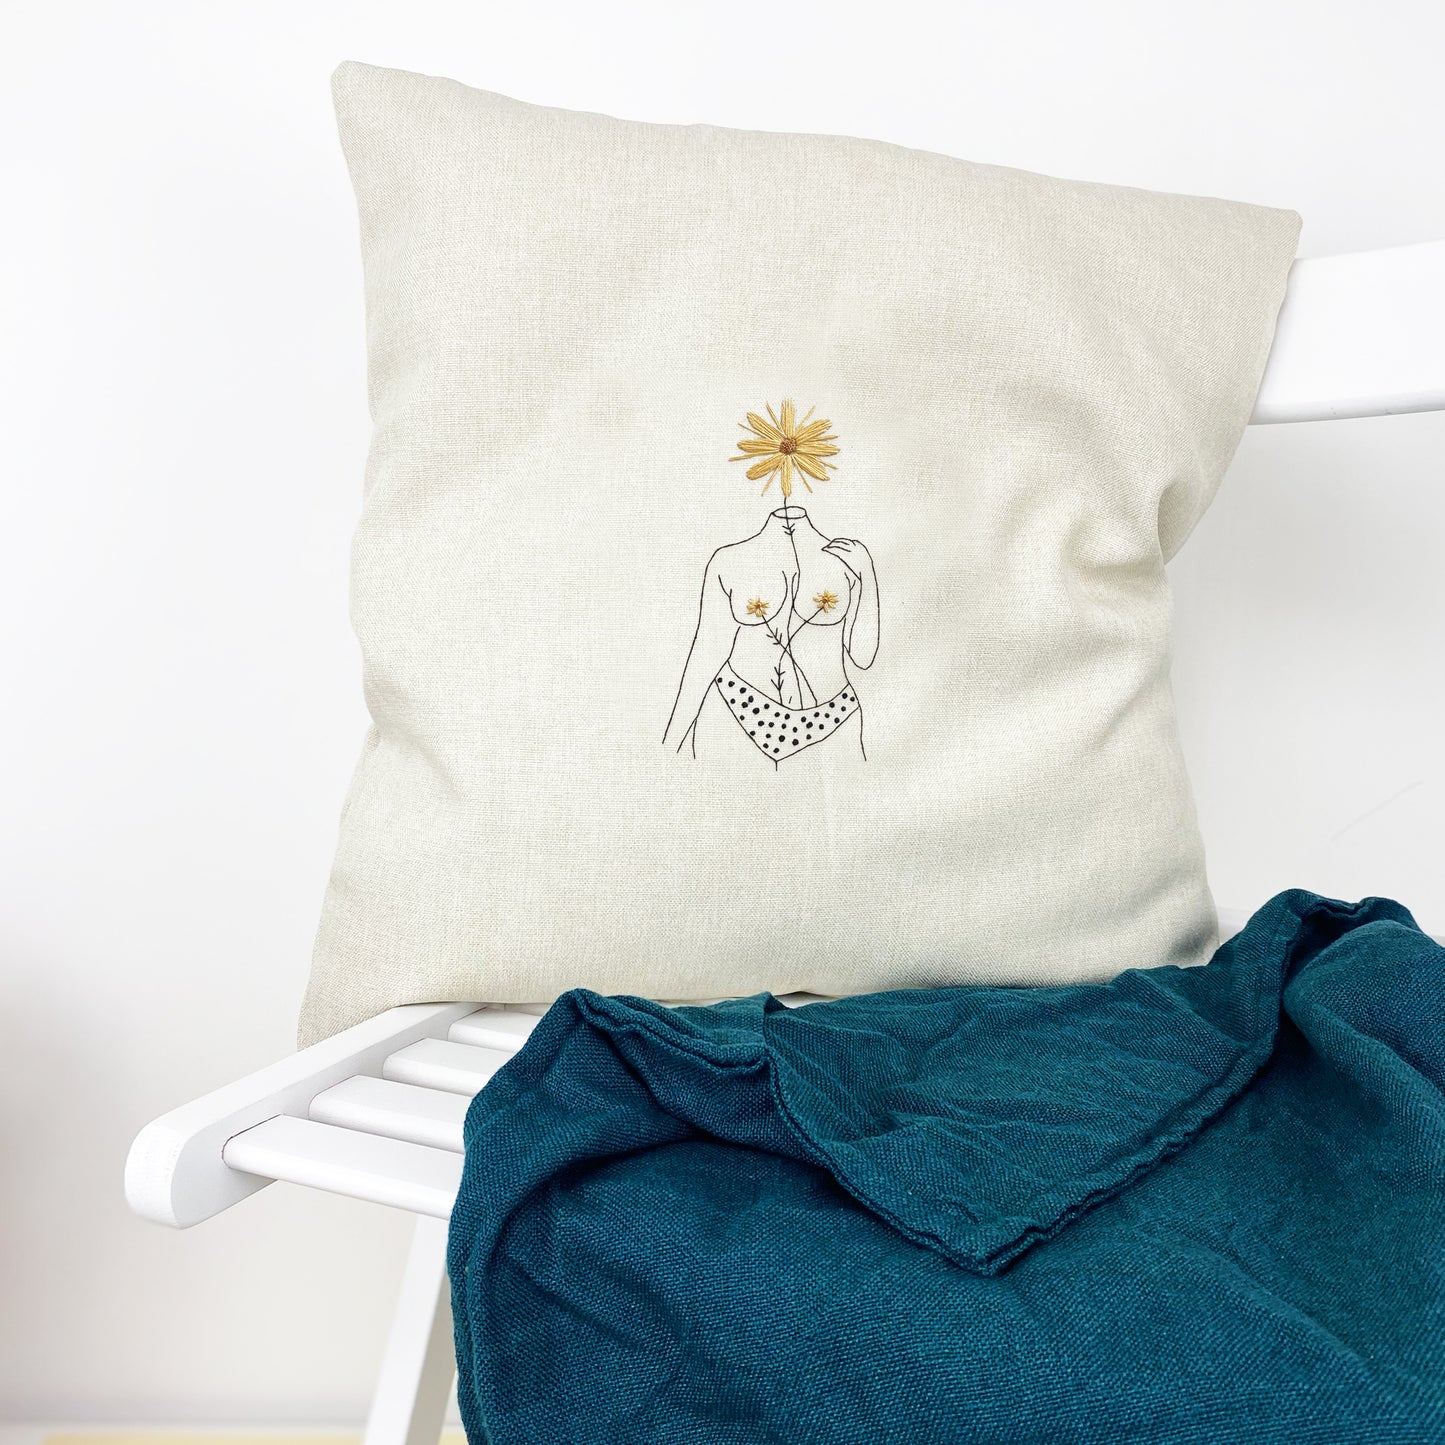 'She is Beauty Embroider your own cushion kit